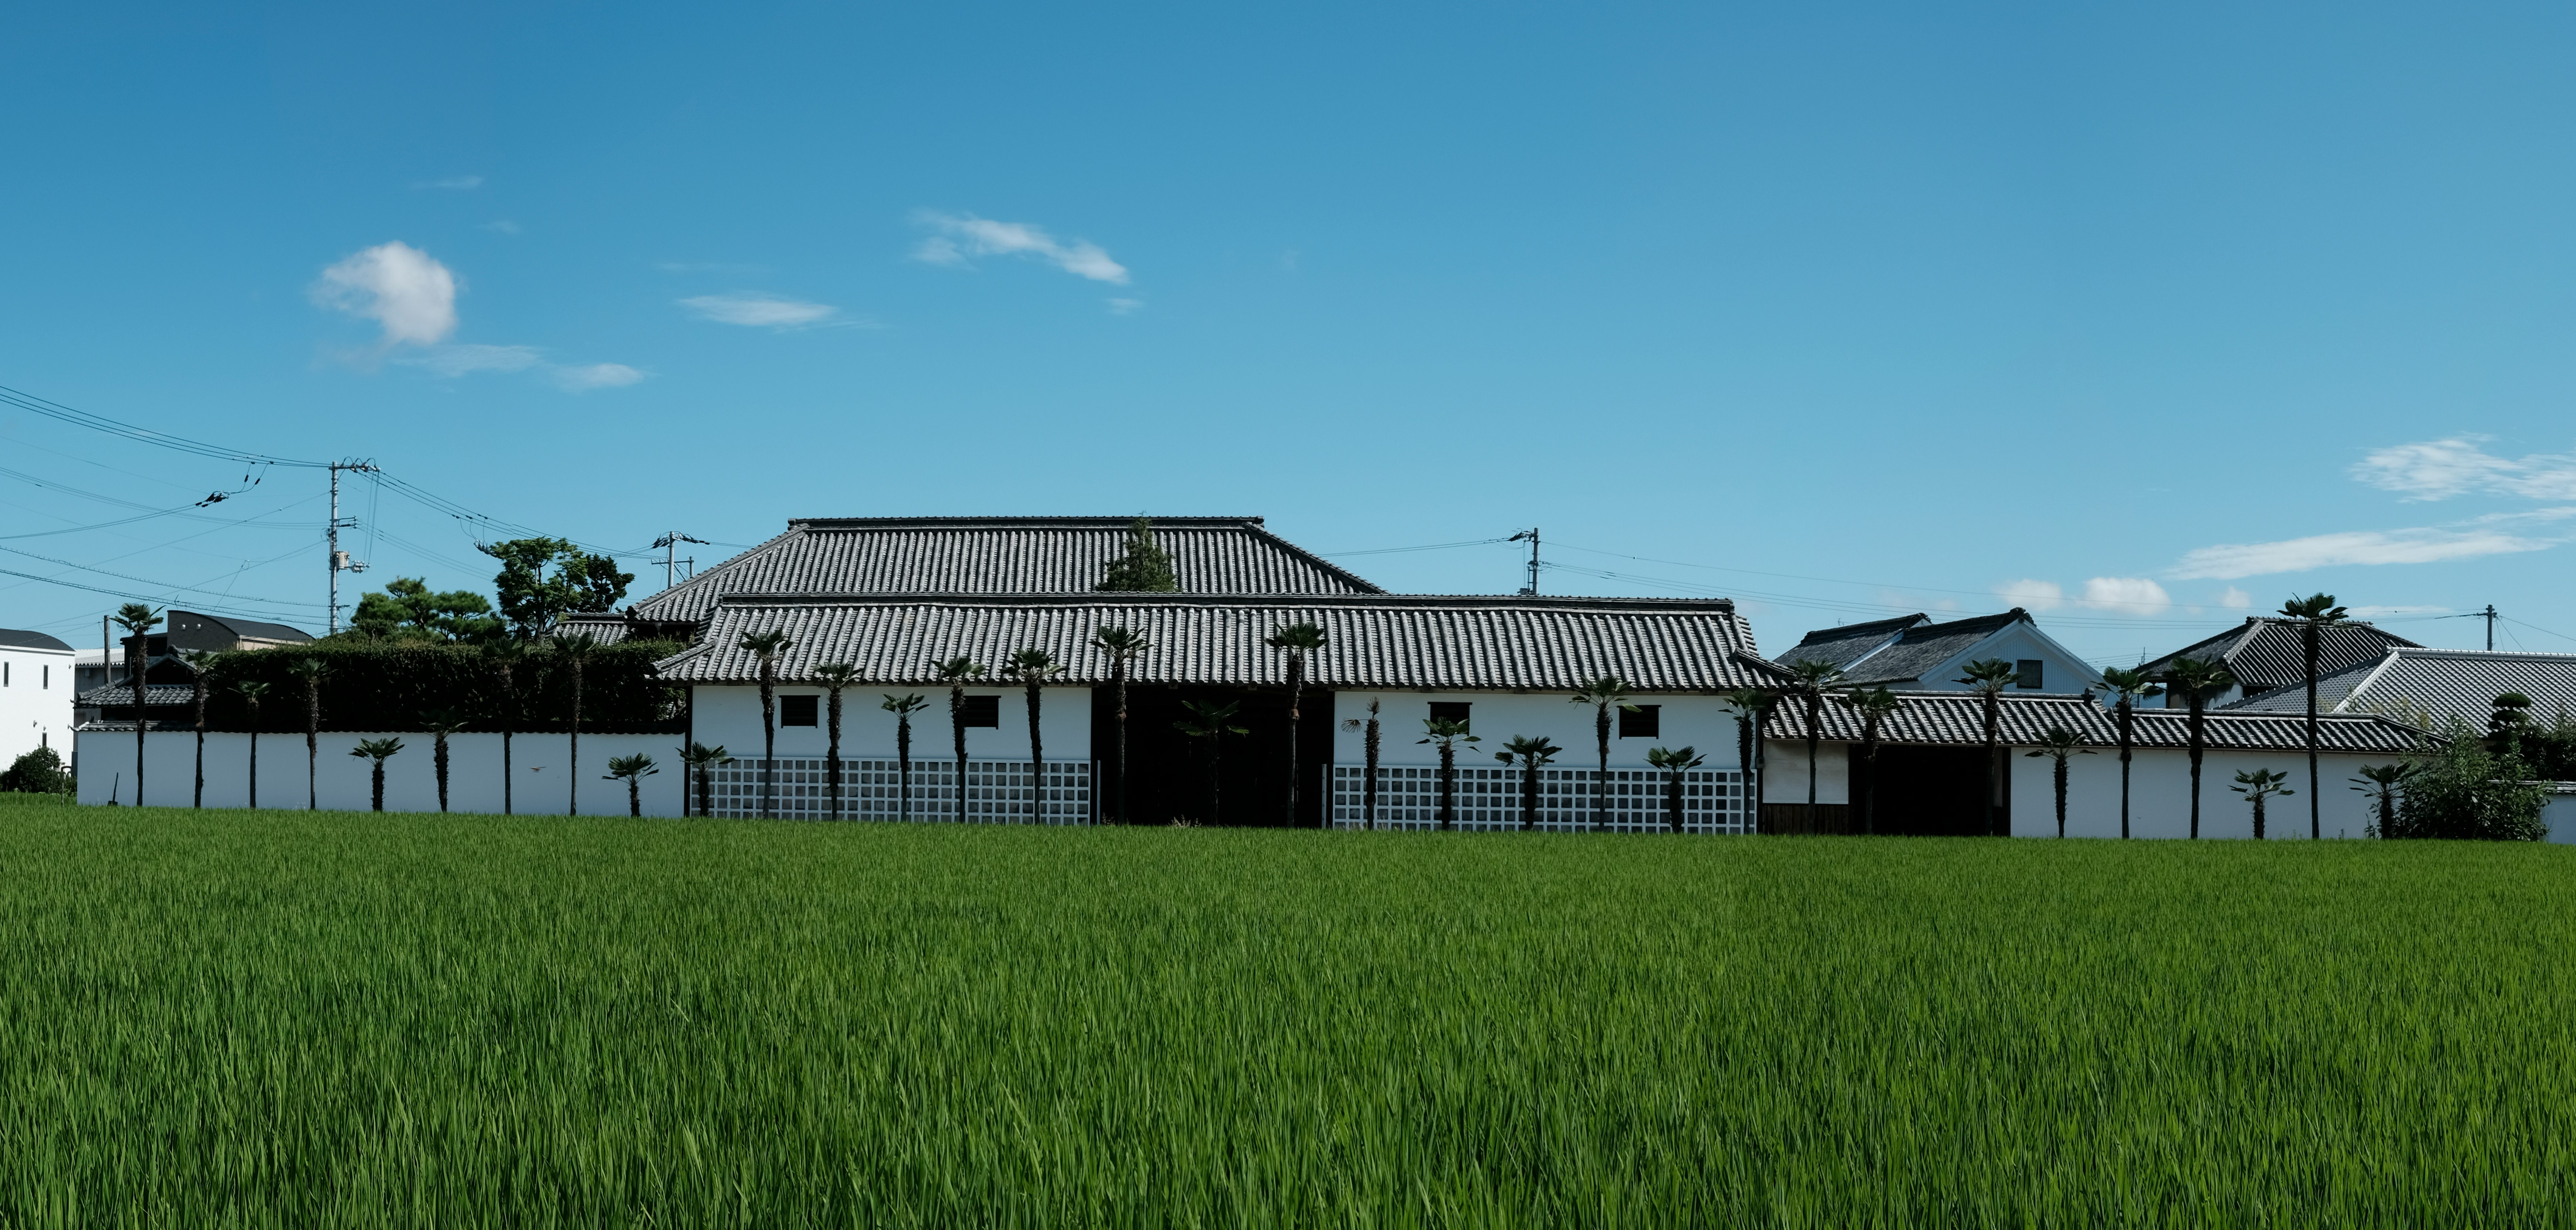 white and black house on green grass field under blue sky during daytime